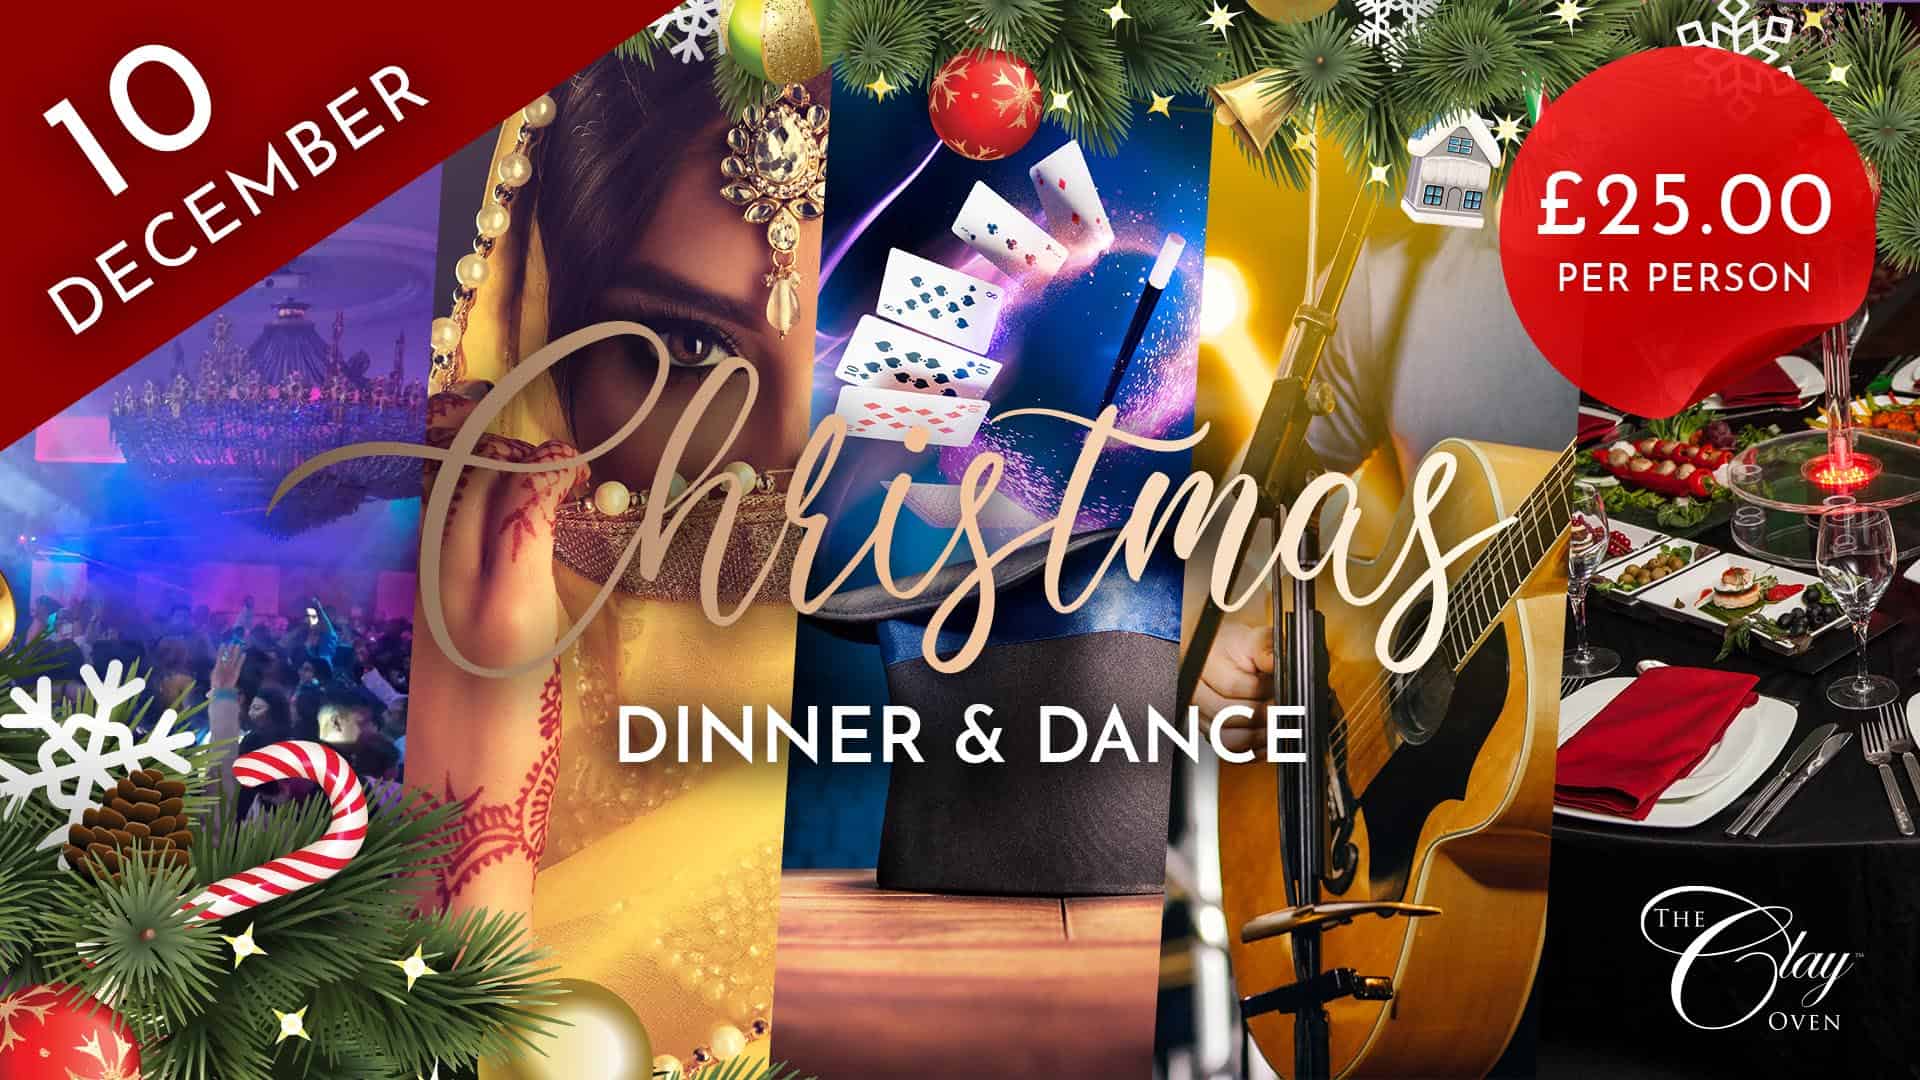 December dinner and dance party.